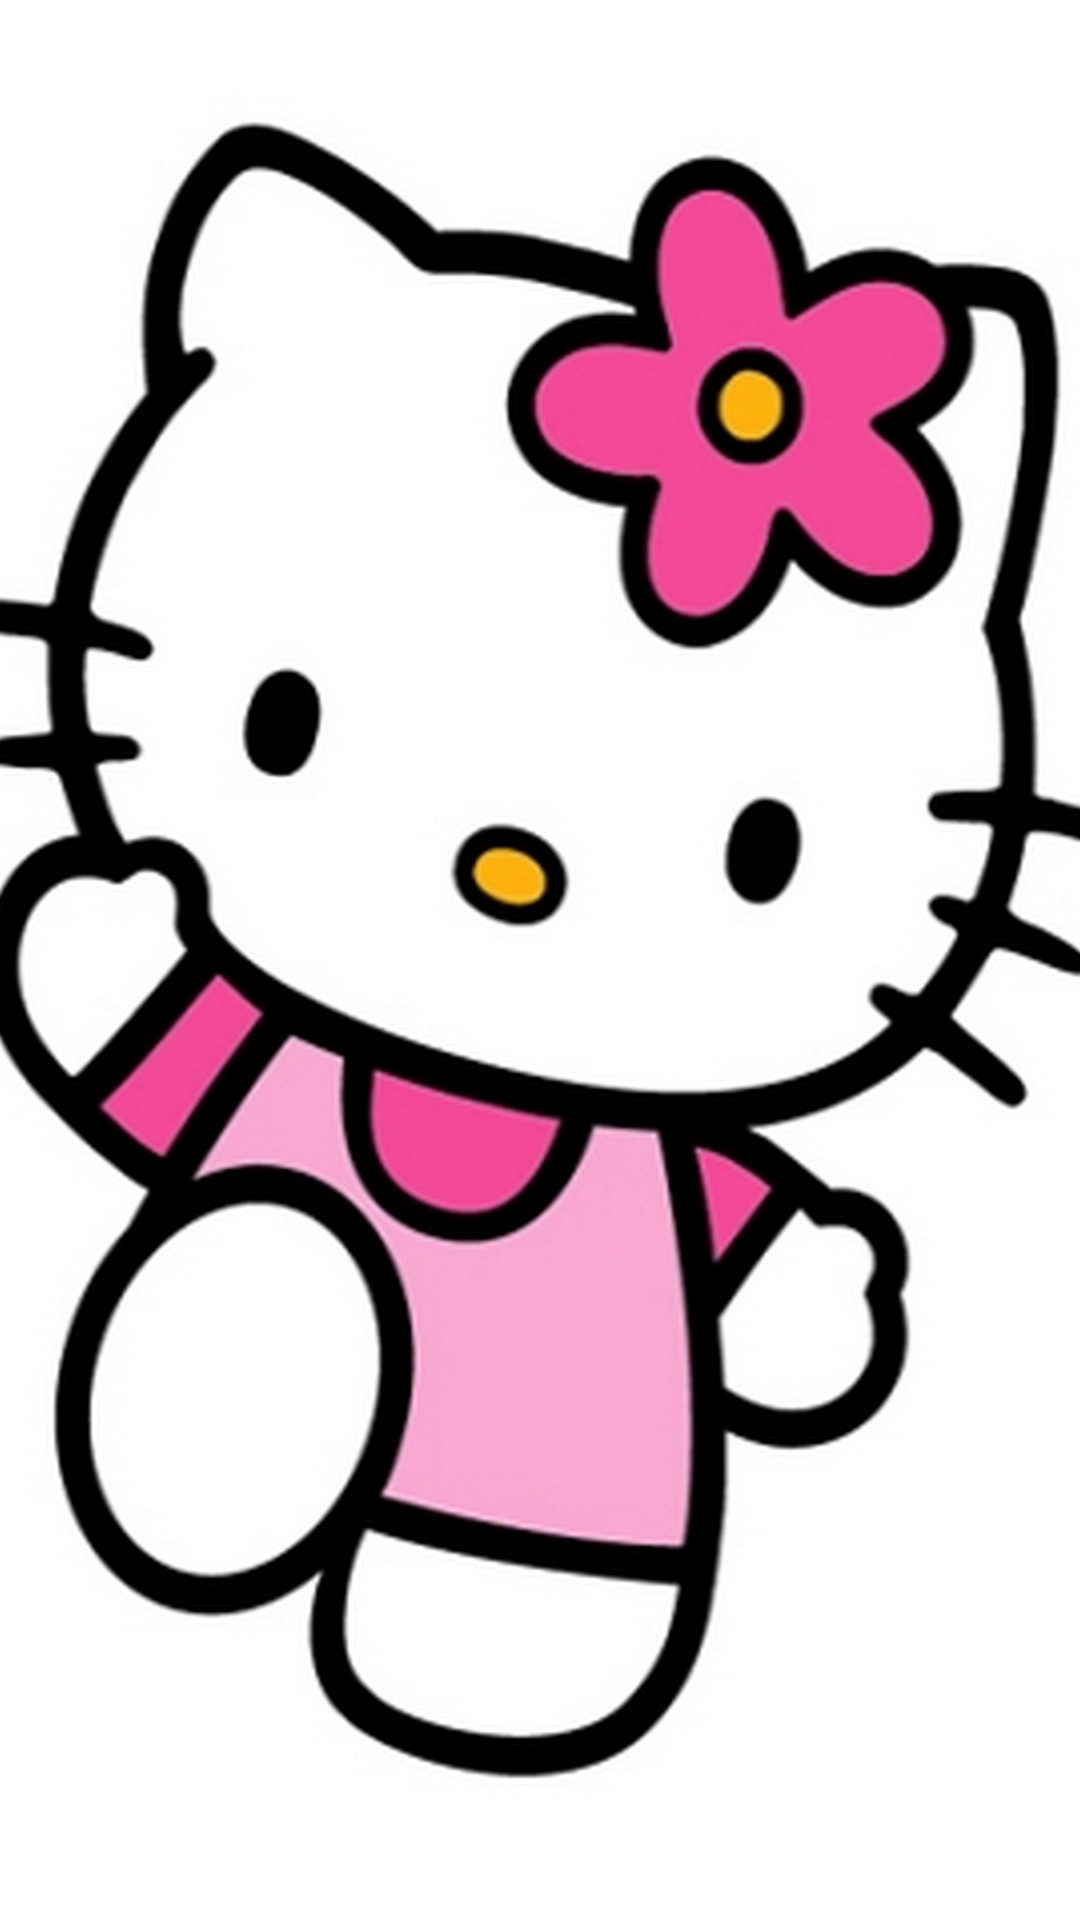 Wallpaper Hello Kitty Mobile With Resolution 1080X1920 pixel. You can make this wallpaper for your Desktop Computer Backgrounds, Mac Wallpapers, Android Lock screen or iPhone Screensavers